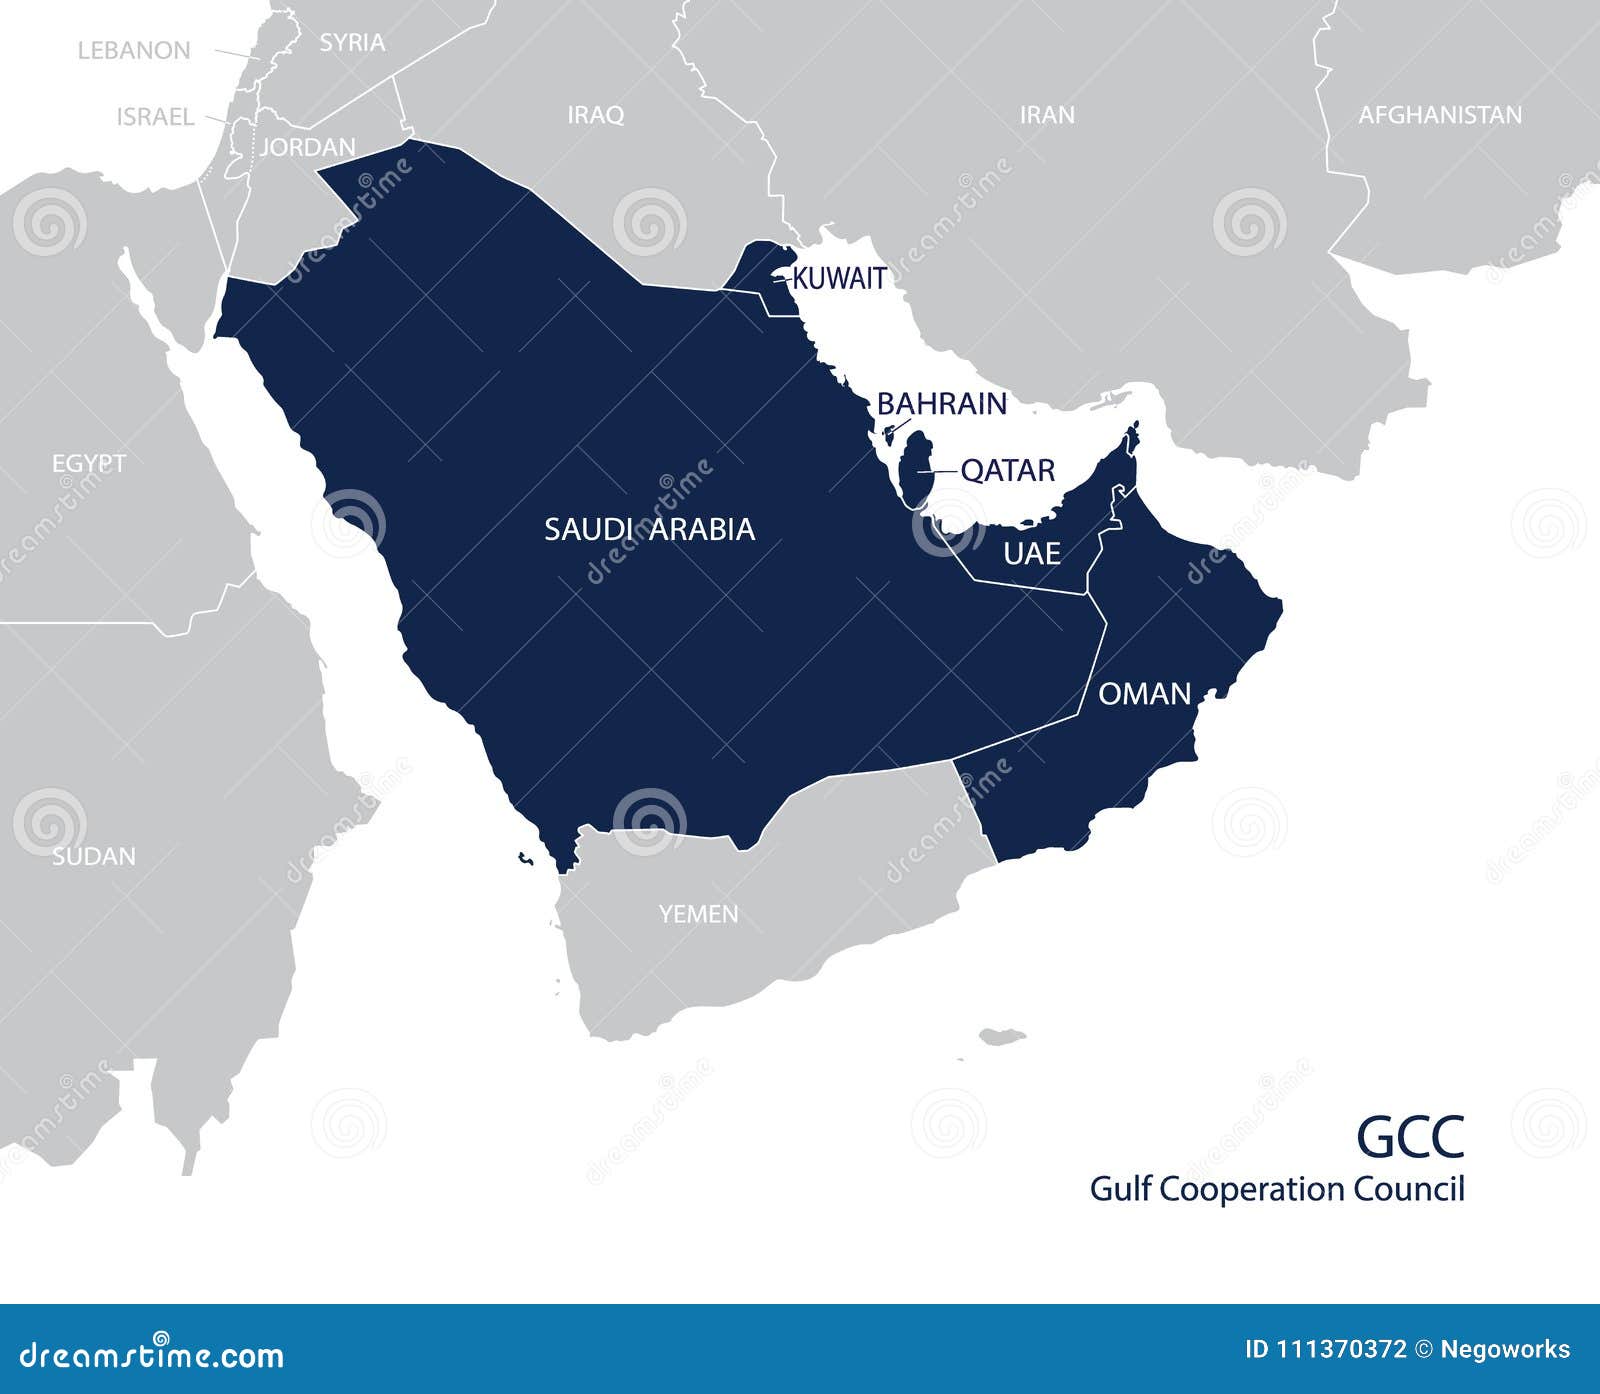 map of the gulf cooperation council gcc`s members. 